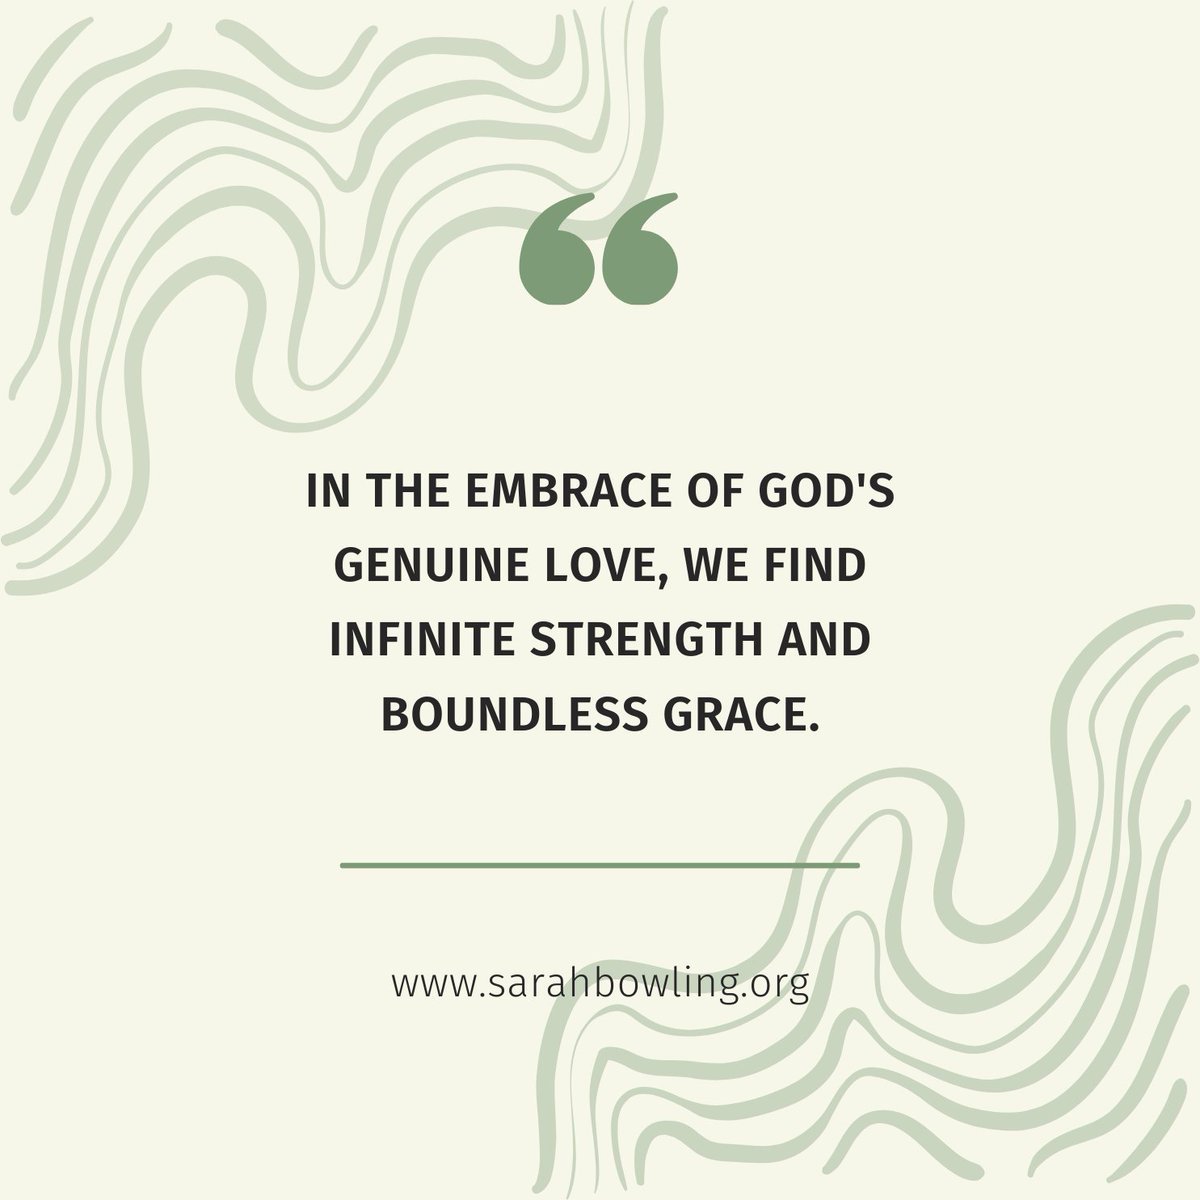 God's love for us supplies us with everything we need. Tag a friend to remind them of God's love for them 🤩
-
#sarahbowling #genuinelove #lovequotes #Godquotes #quotesforsuccess #dailyquotes #dailywisdom #lovegodloveothers #pursuelove #grateful #jesusdiedforus